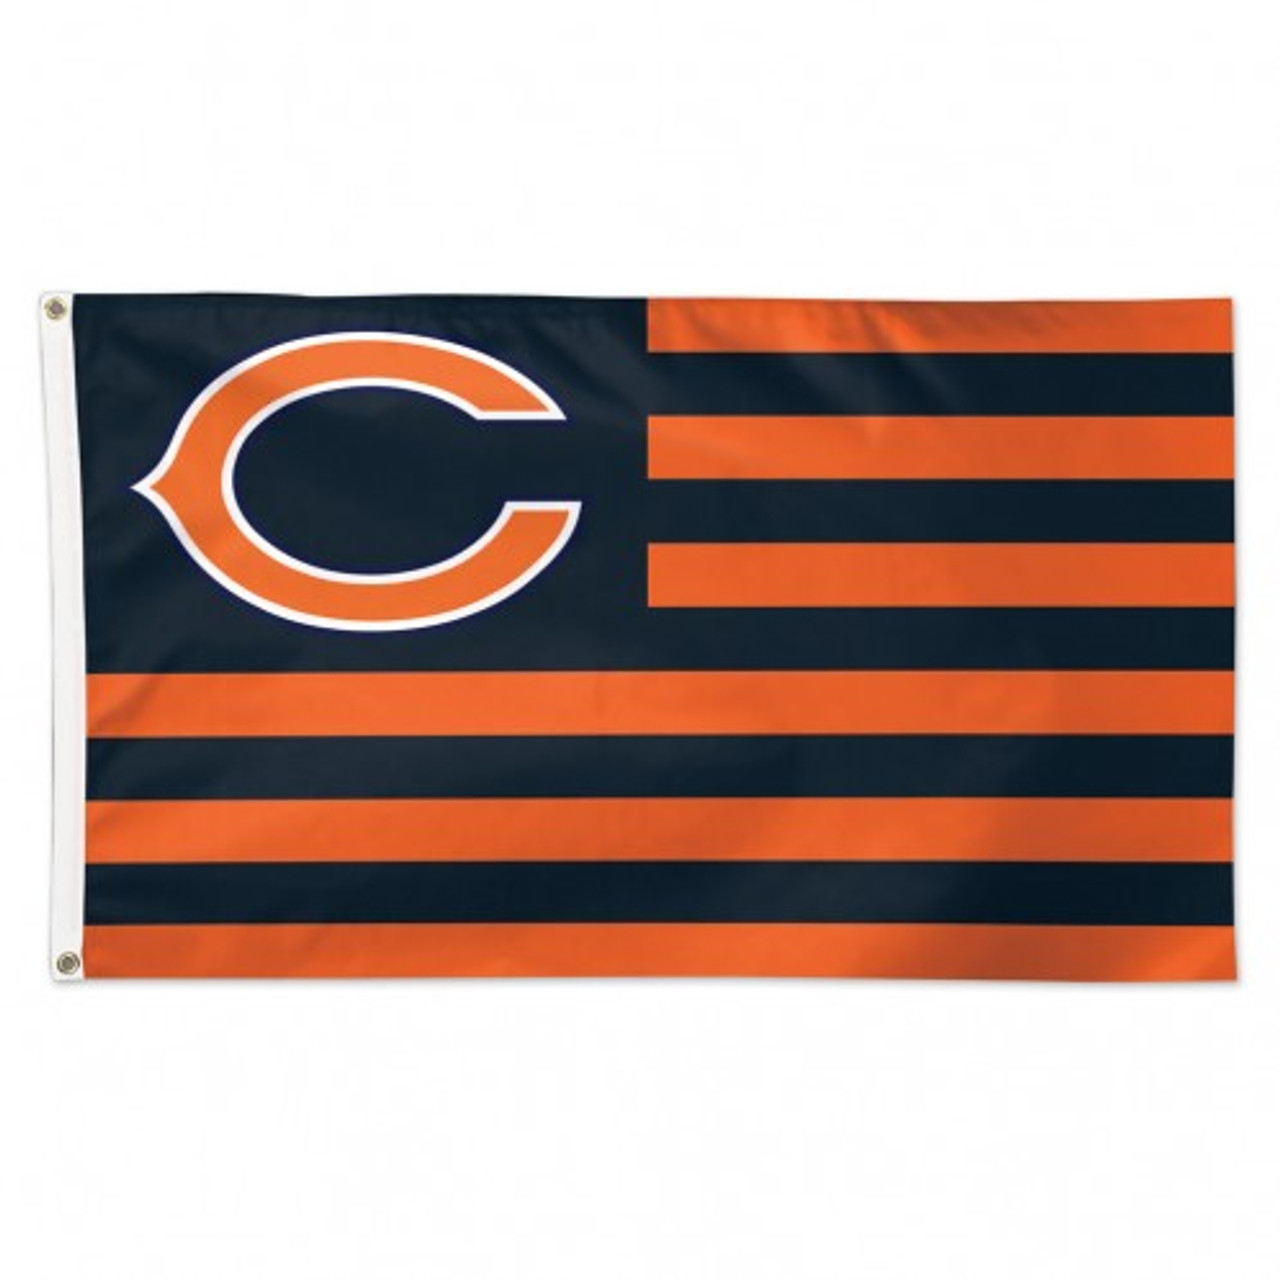 Close-up of Waving Flag with Chicago Bears NFL American Football